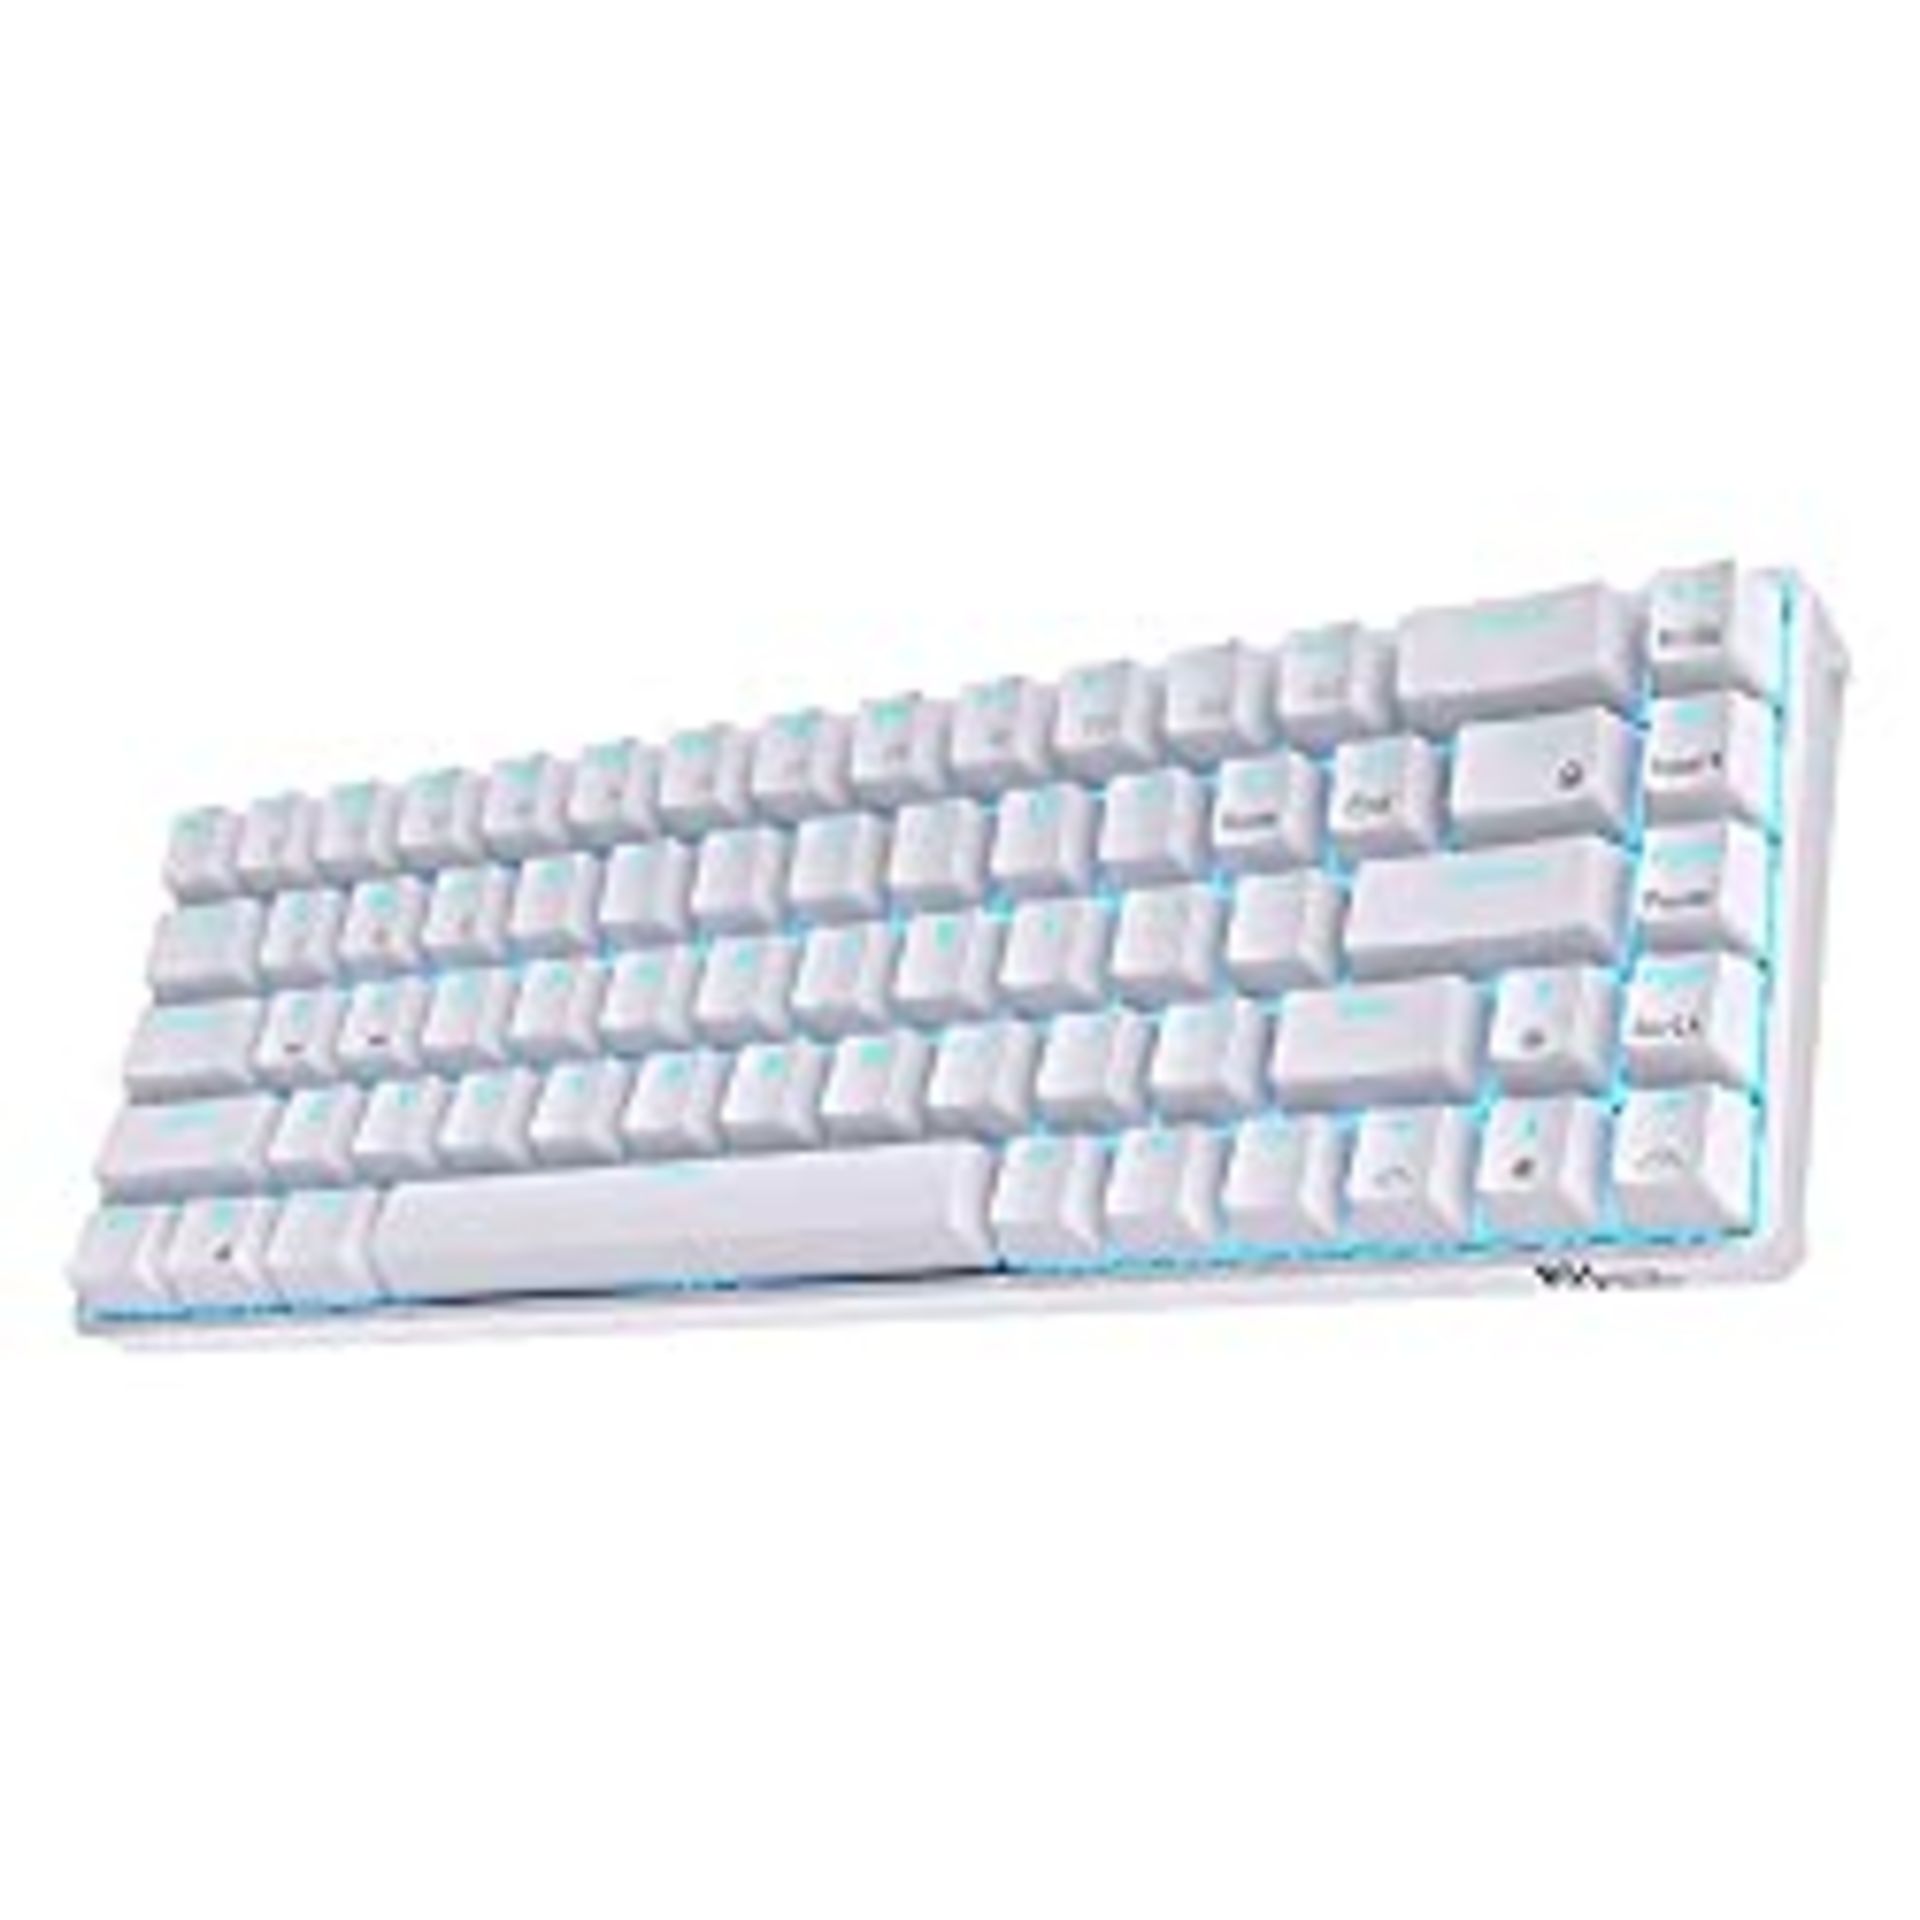 RRP £69.98 RK ROYAL KLUDGE RK68 Hot-Swappable 65% Wireless Mechanical Keyboard